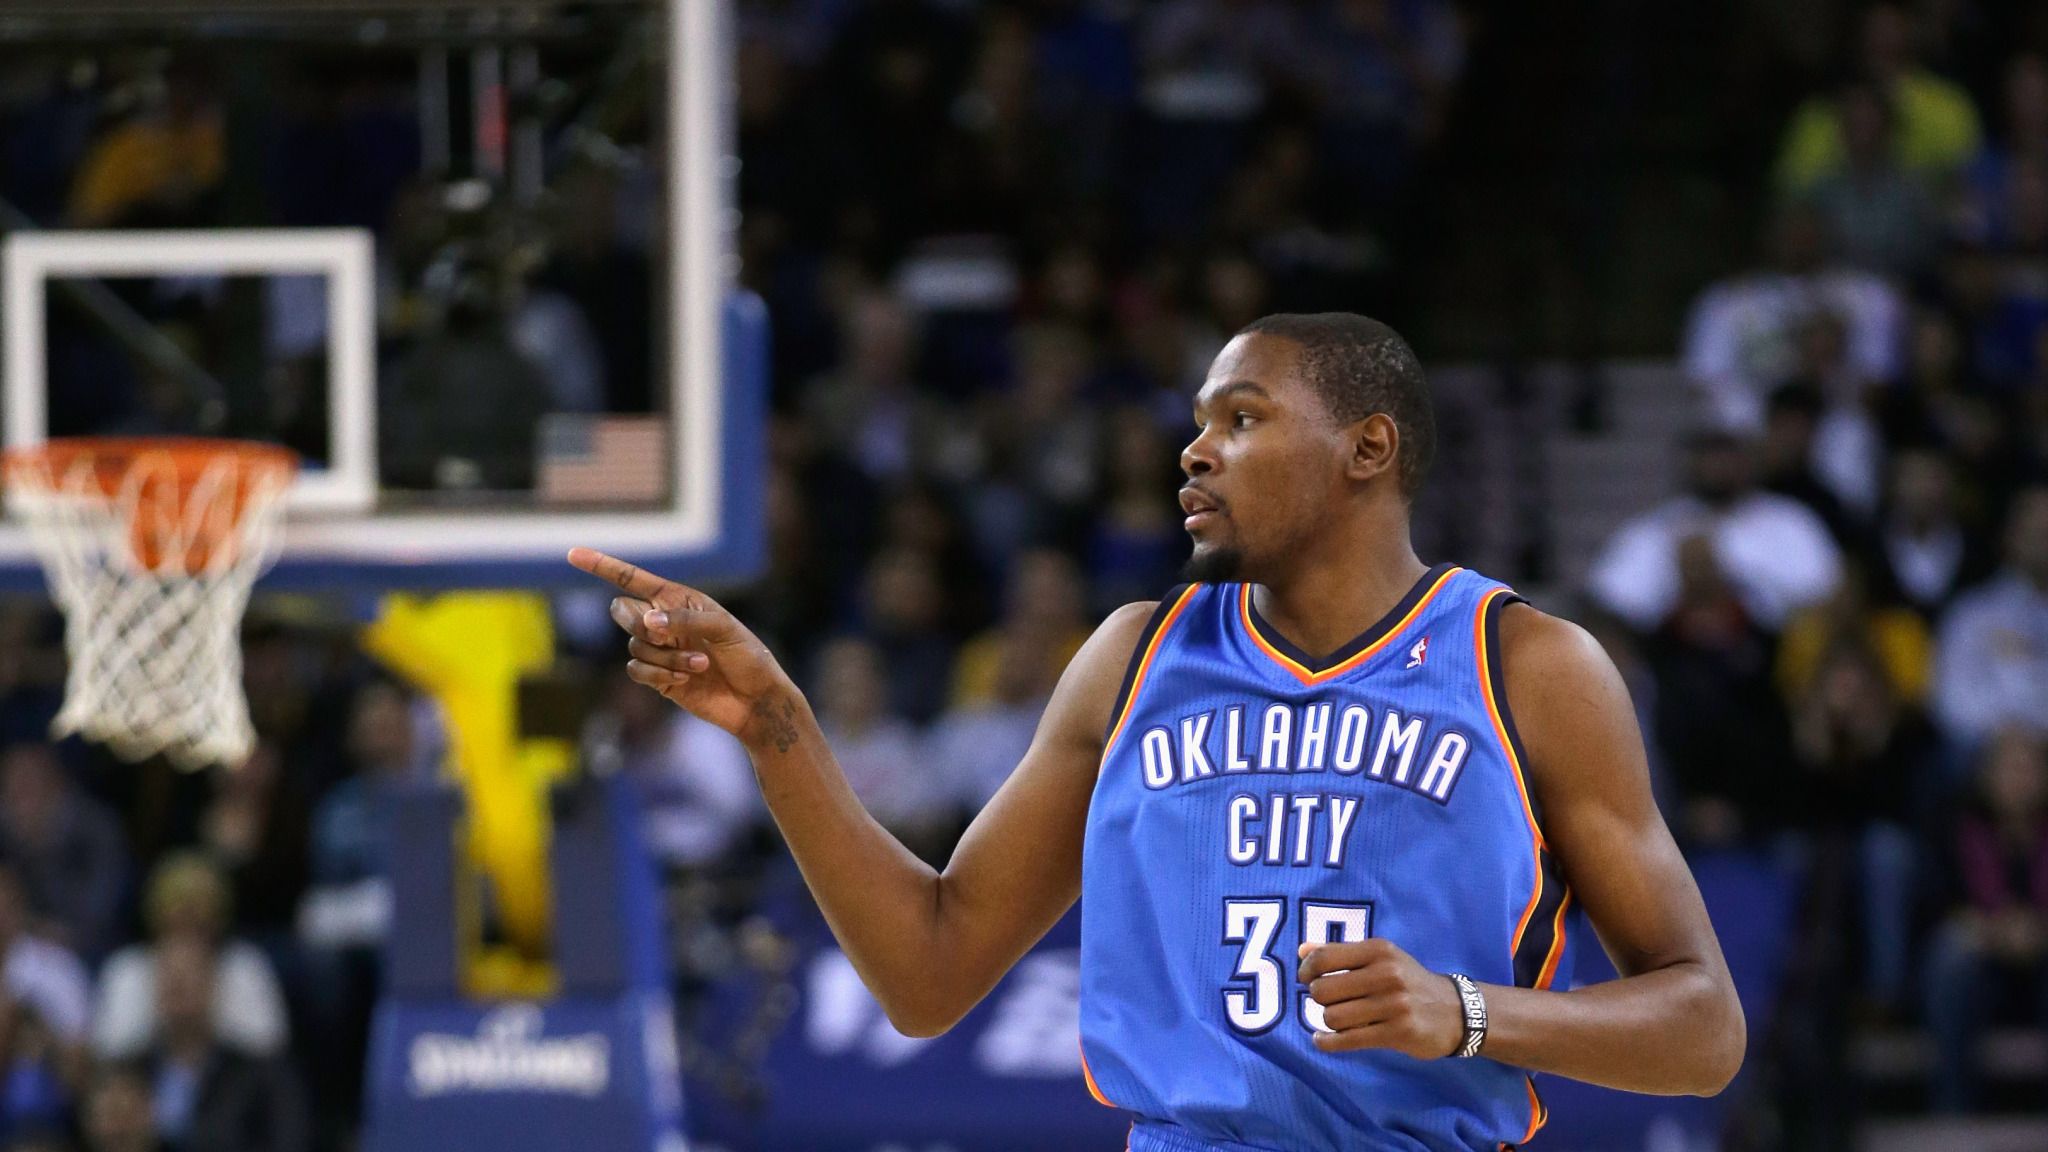 Kevin Durant jersey goes for 48 cents in Oklahoma City – The Mercury News